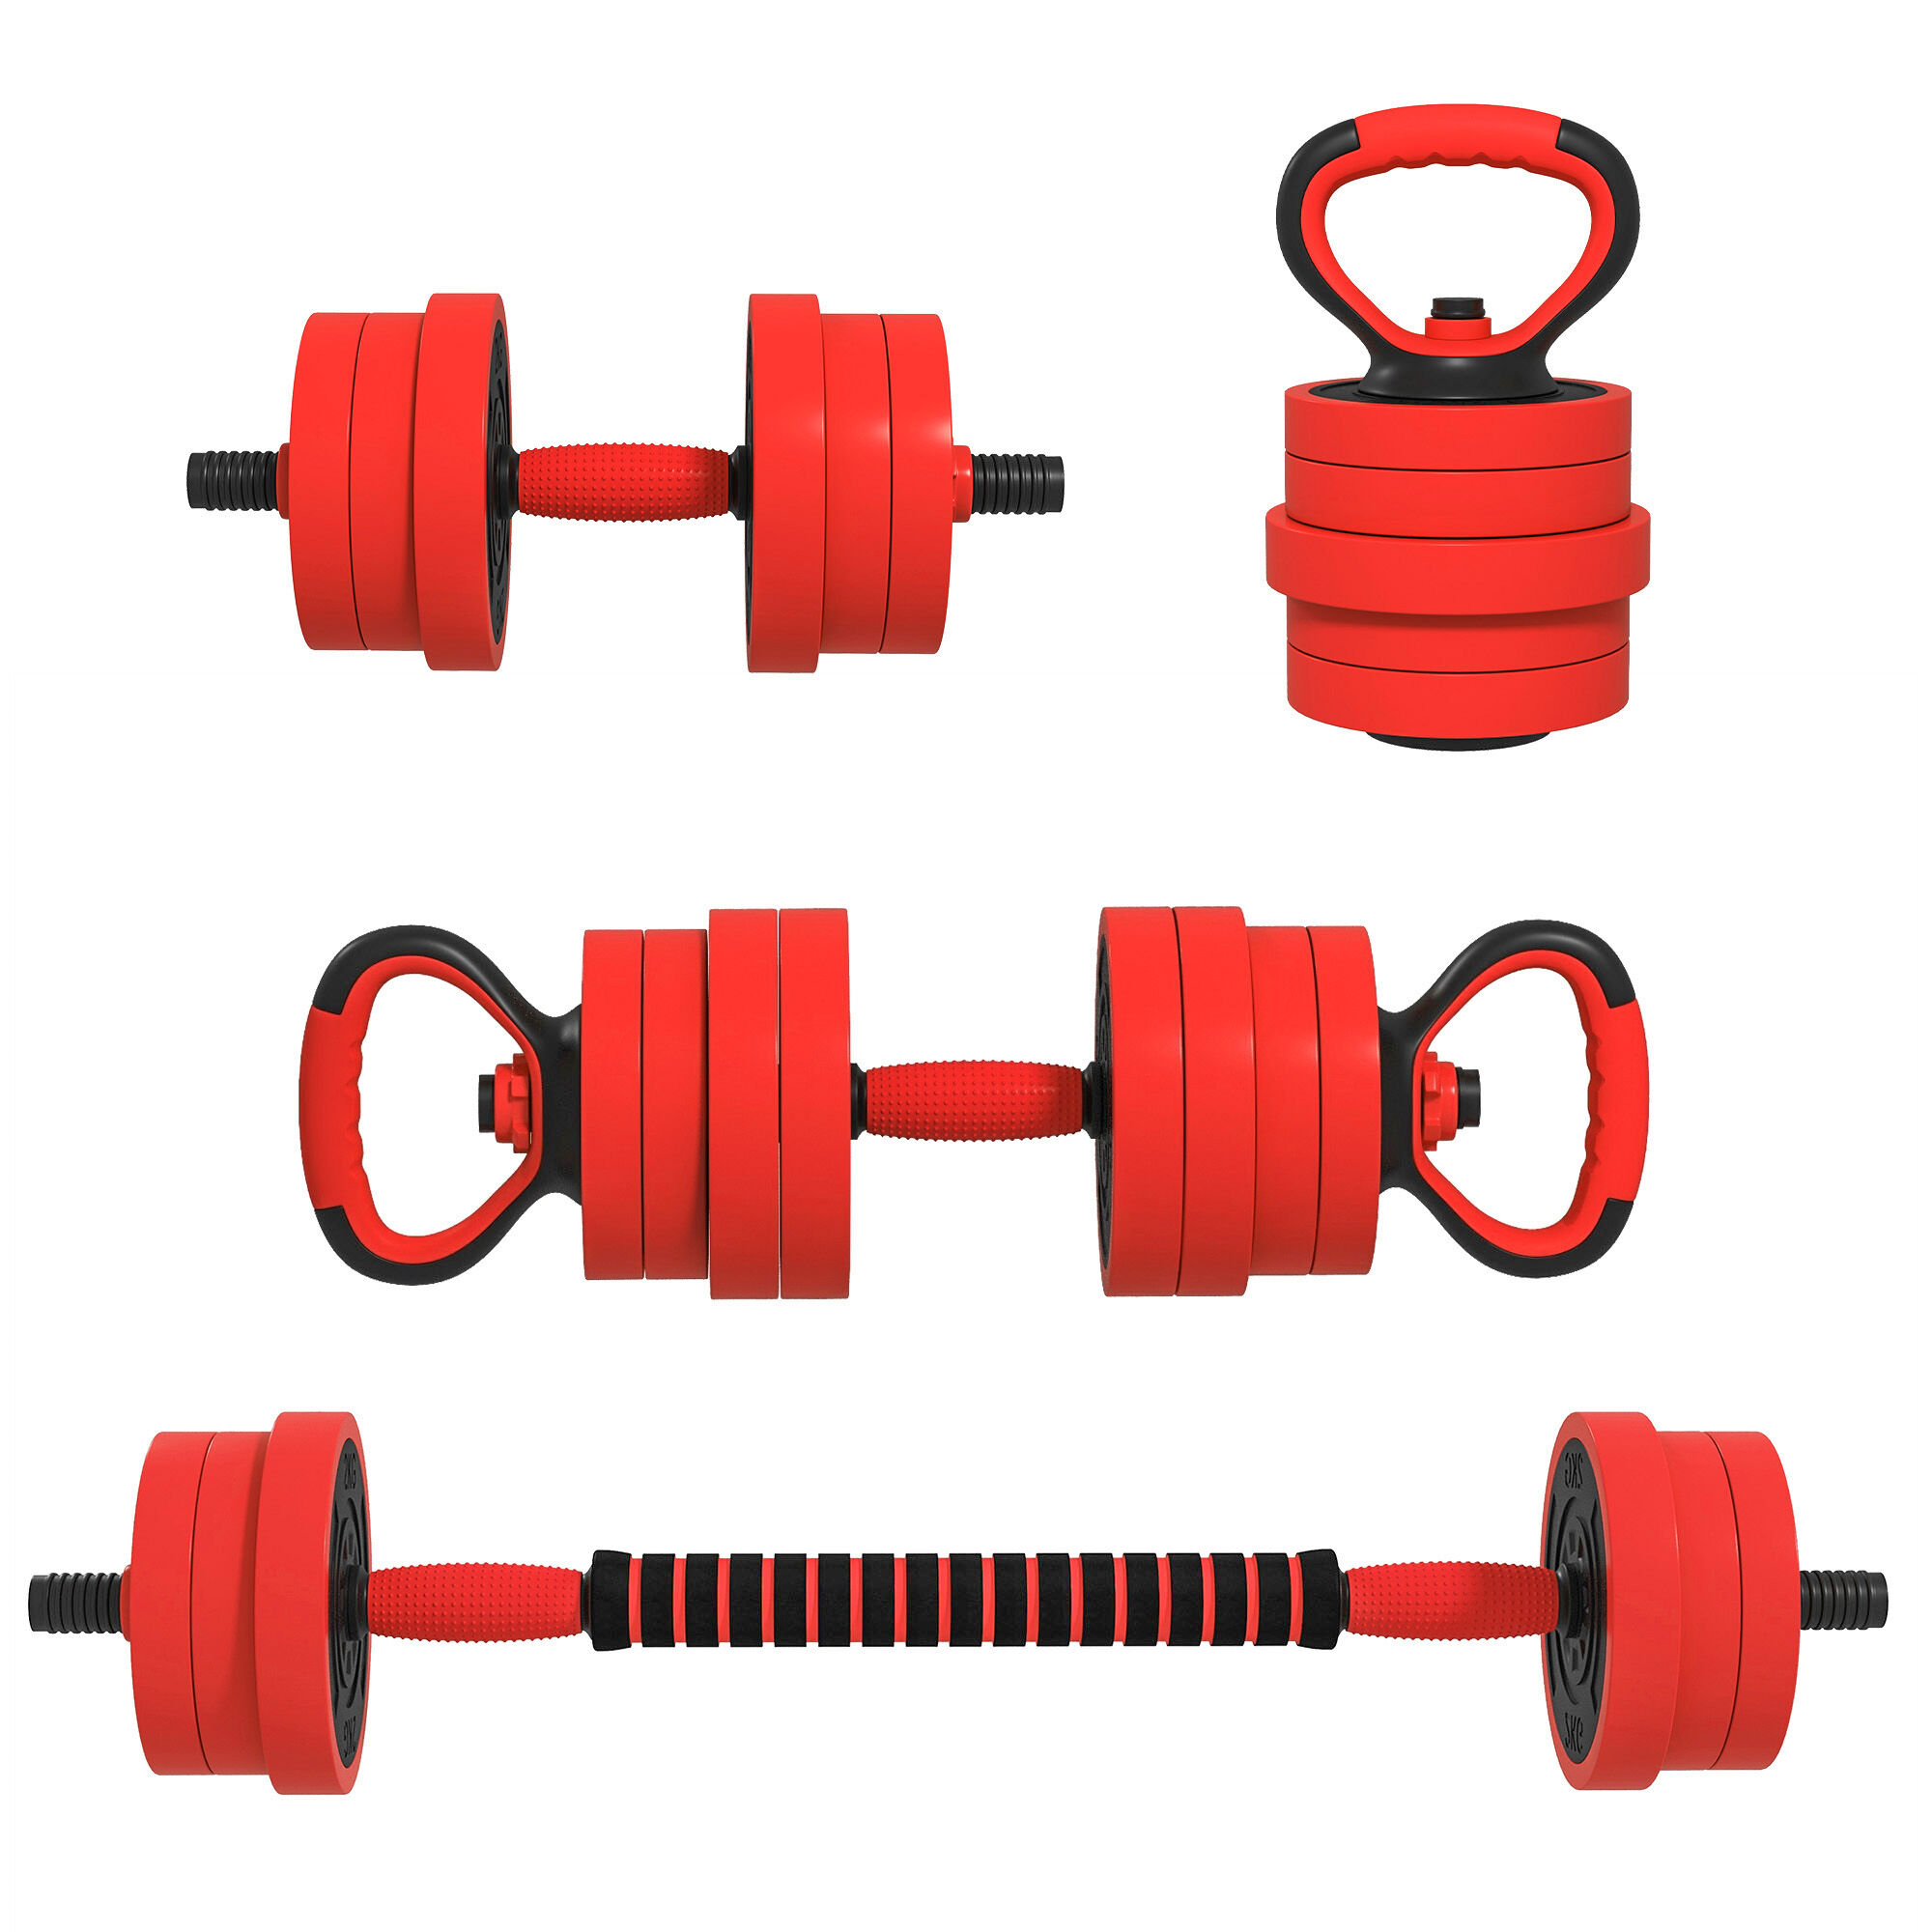 Soozier Adjustable 4-in-1 Dumbbell Set for Home Gym Multifunctional Weight Training 44lbs Versatile Equipment   Aosom.com